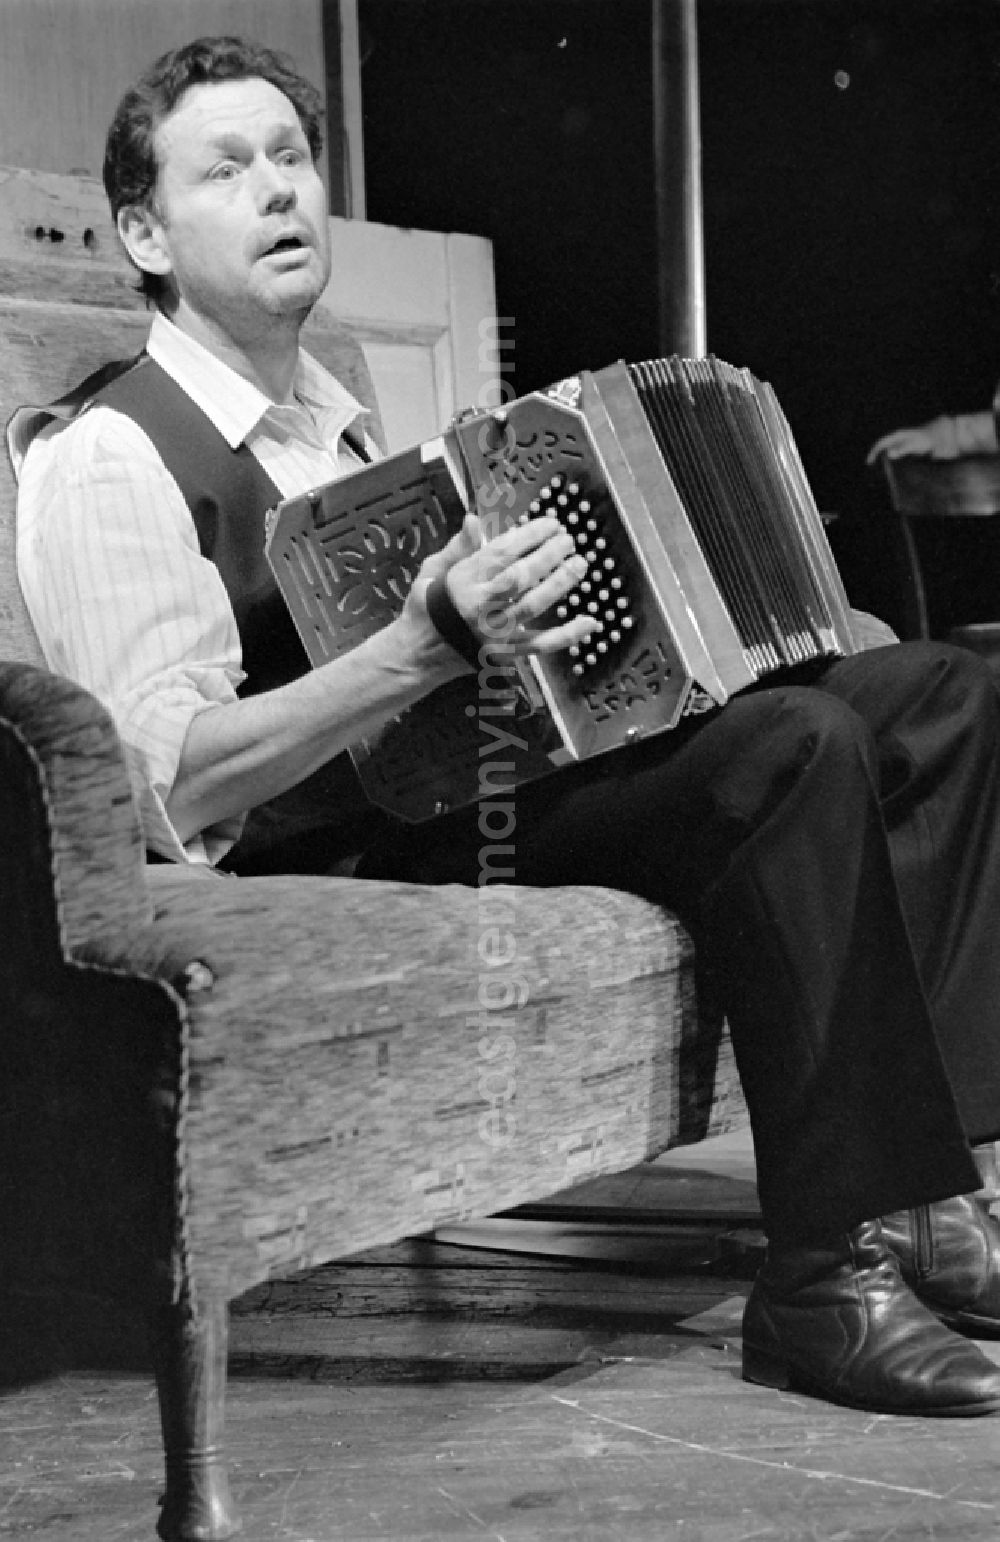 GDR picture archive: Berlin - German Theatre Berlin - Berlin Songs From Then And Yesterday. Actors and performers in a theatre - scene and stage set in the Mitte district of Berlin, the former capital of the GDR, German Democratic Republic. On stage - Reimar Johannes Baur with accordion on the sofa